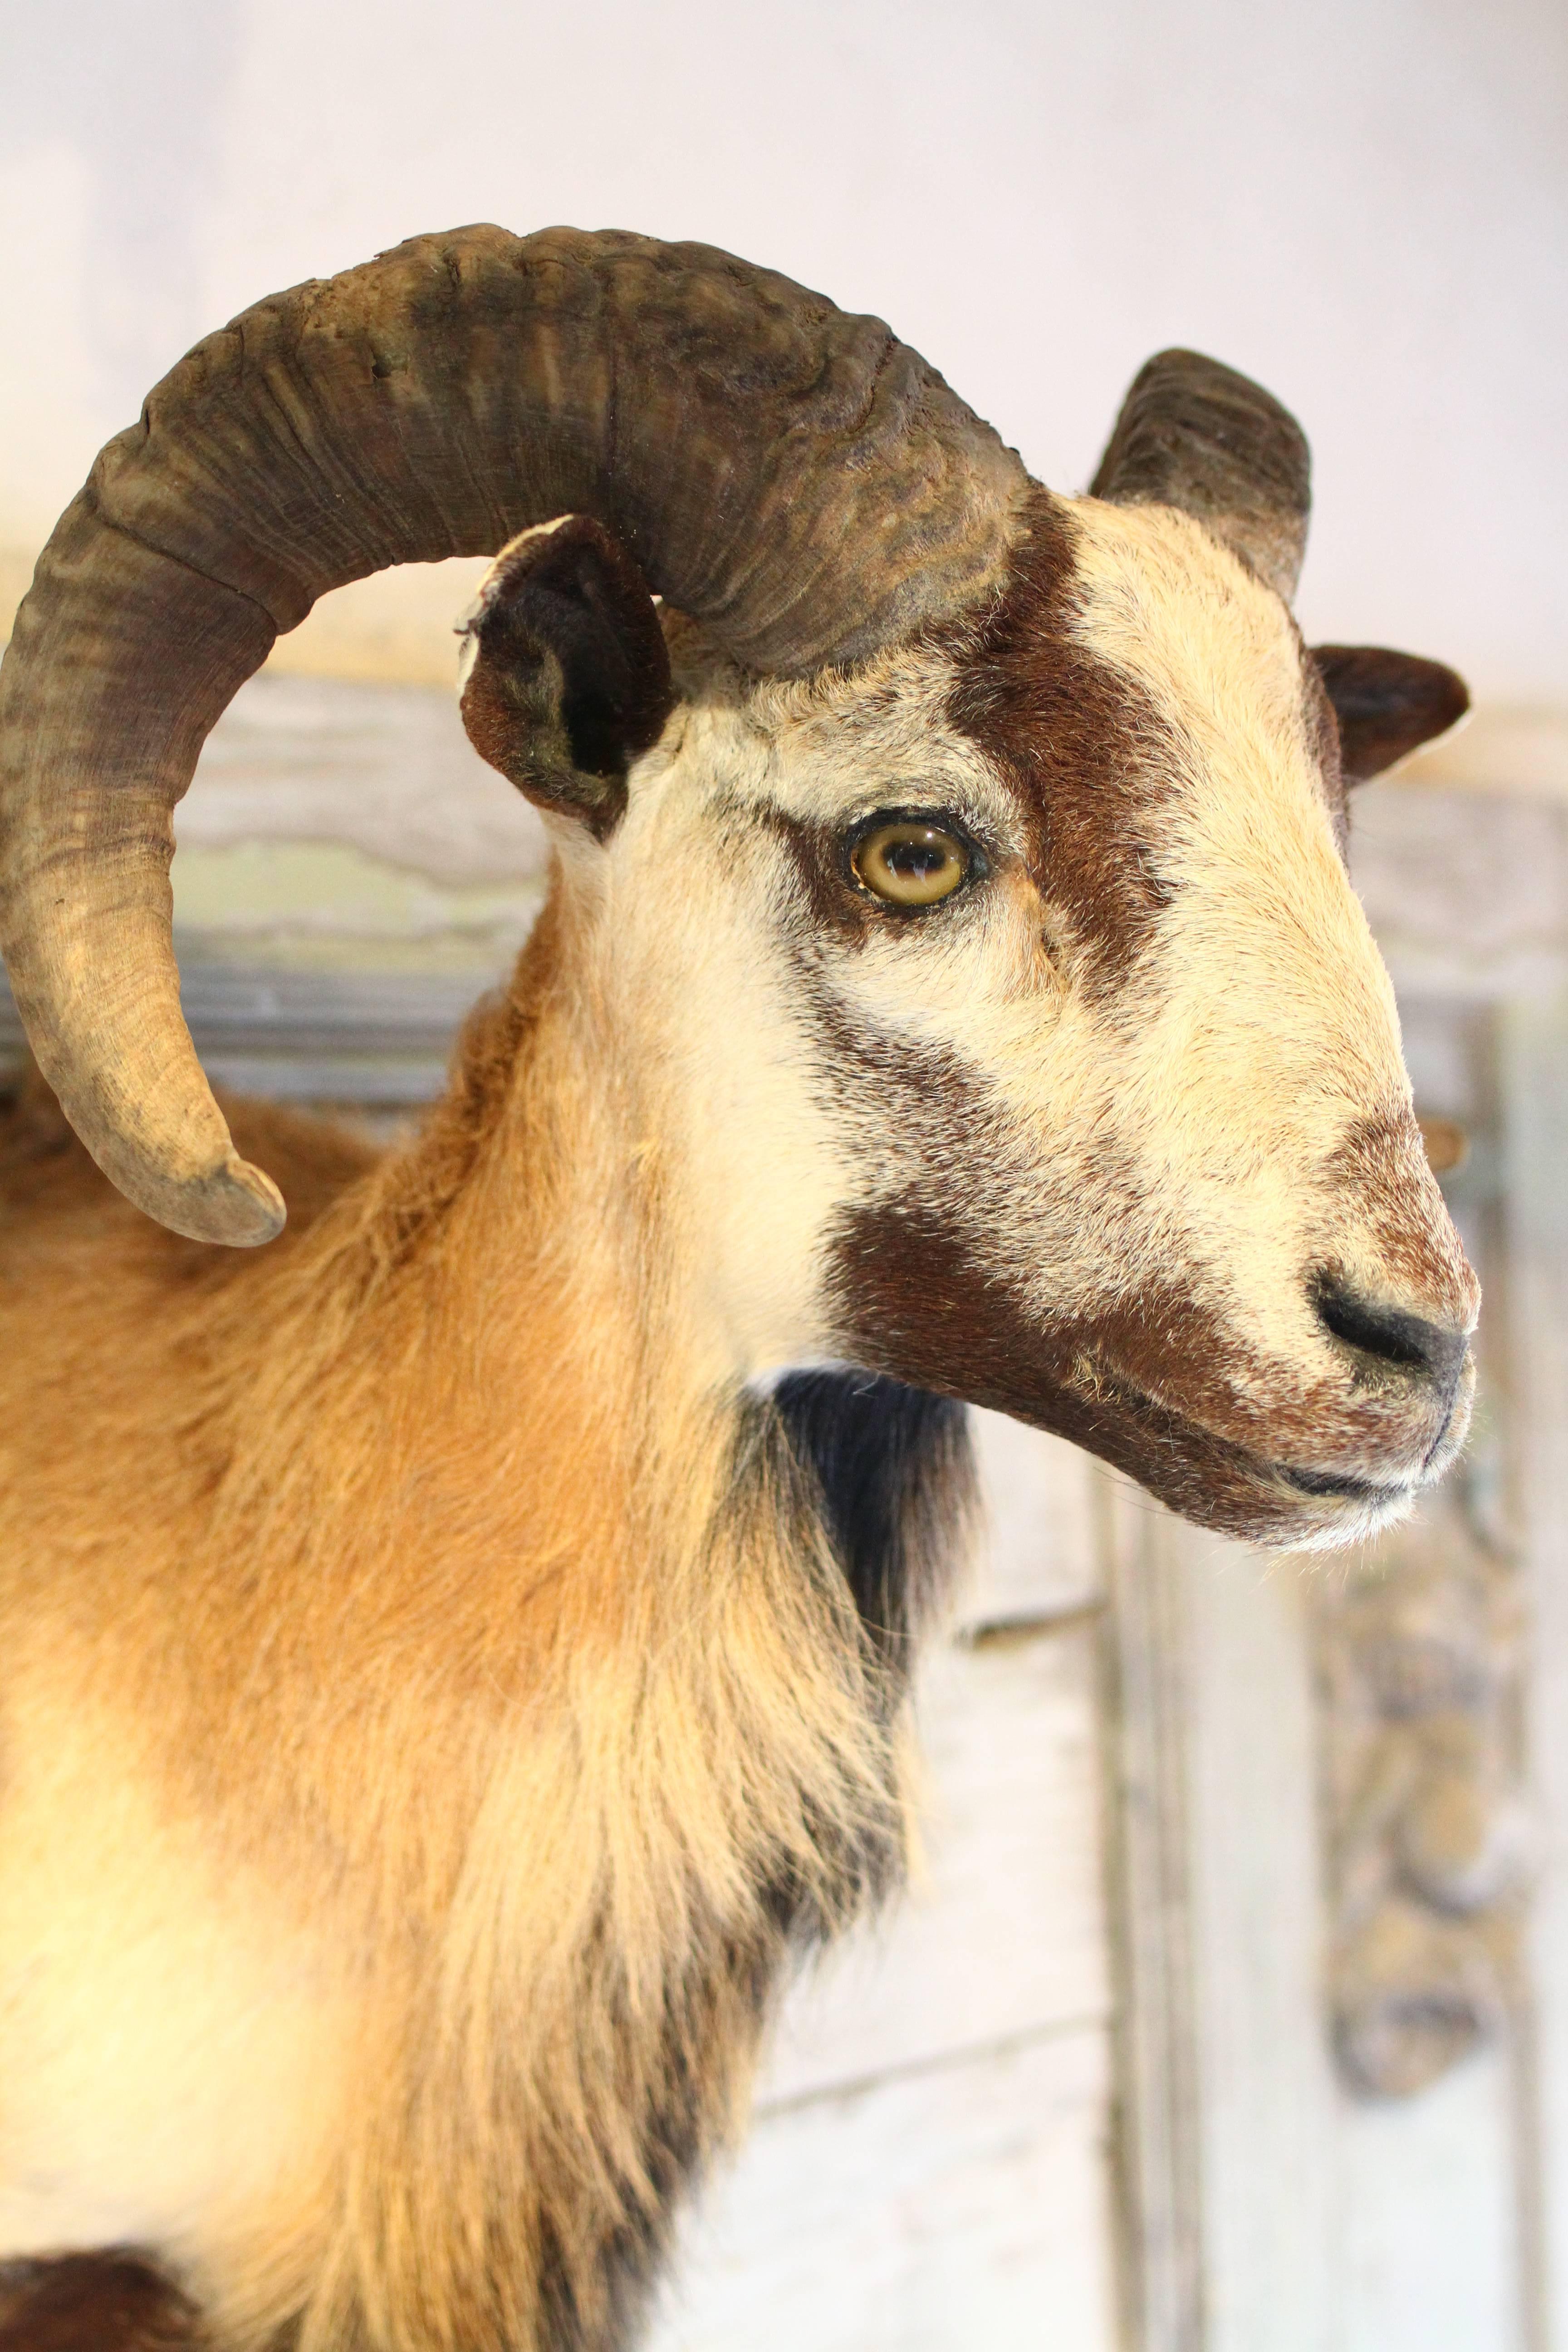 This handsome goat head mount is in pristine condition with very clear glassy eyes, long hair on the neck and yet close tiny hair around the horns. There are no balding or thinning spots and the horns are thick and grooved. Perfect to mount in a